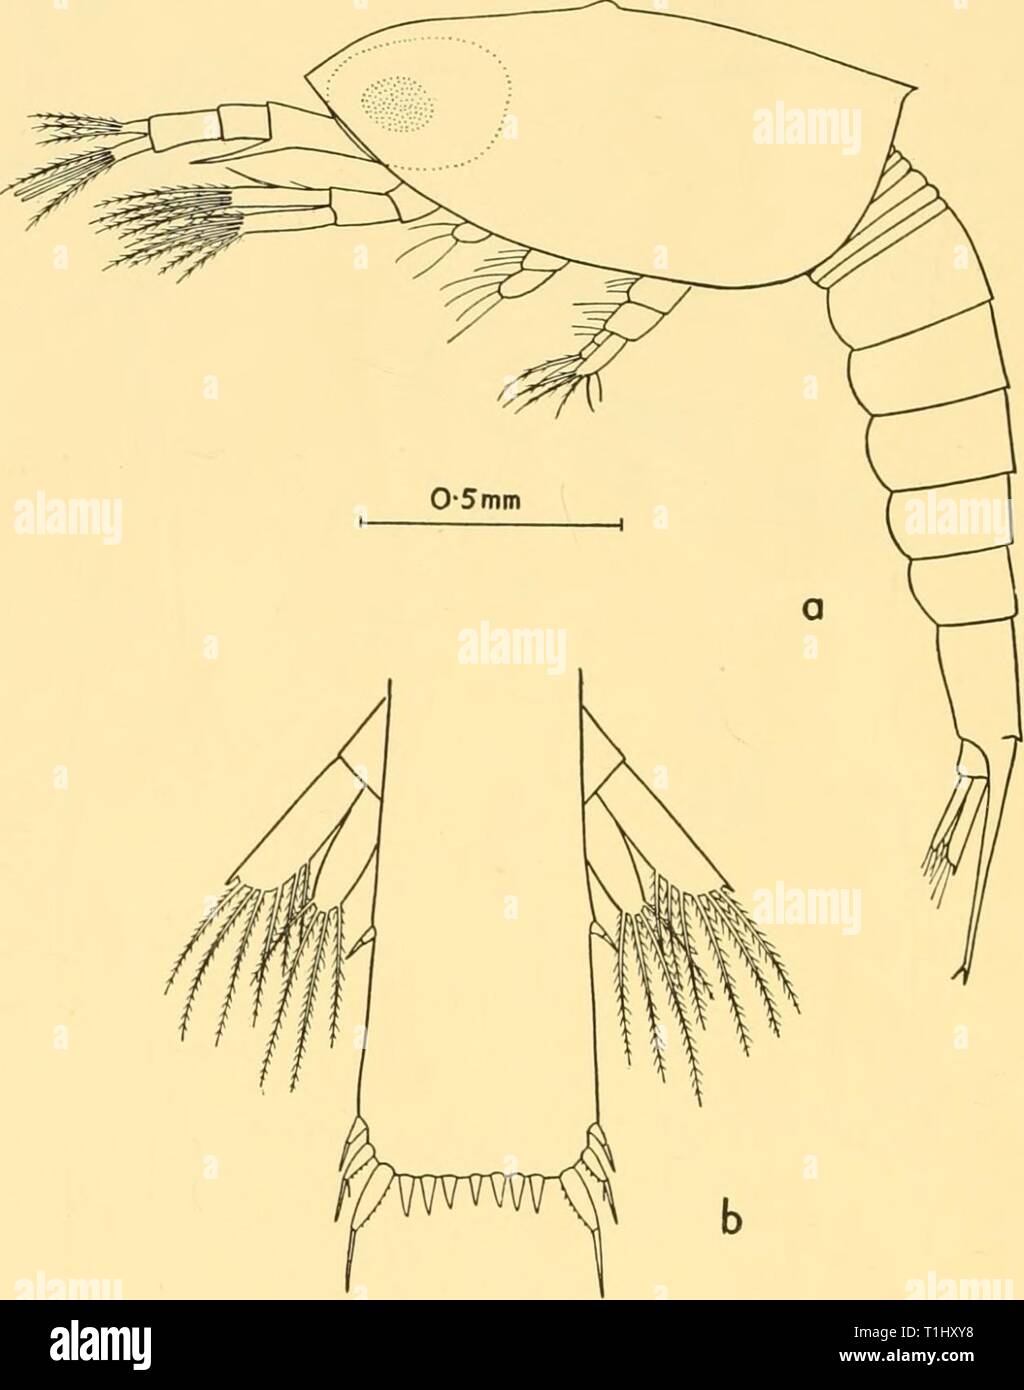 Discovery reports (1956) Discovery reports  discoveryreports27inst Year: 1956  374 DISCOVERY REPORTS Third calyptopis. Eleven specimens examined (Fig. 240, b). Length range 2-4-2-9 mm.; average length 2*7 mm. The carapace is unchanged except for the appearance of the rudiments of the dorsal crest. The inferior margin is smooth. The compound eyes are globular and pigmented. The basal segment of the first antennal peduncle bears a strong toothed spine on its outer, distal margin. This reaches to about the middle of the last peduncular segment.    0-25mm Fig. 24. Nematoscelis megalops. a, third c Stock Photo